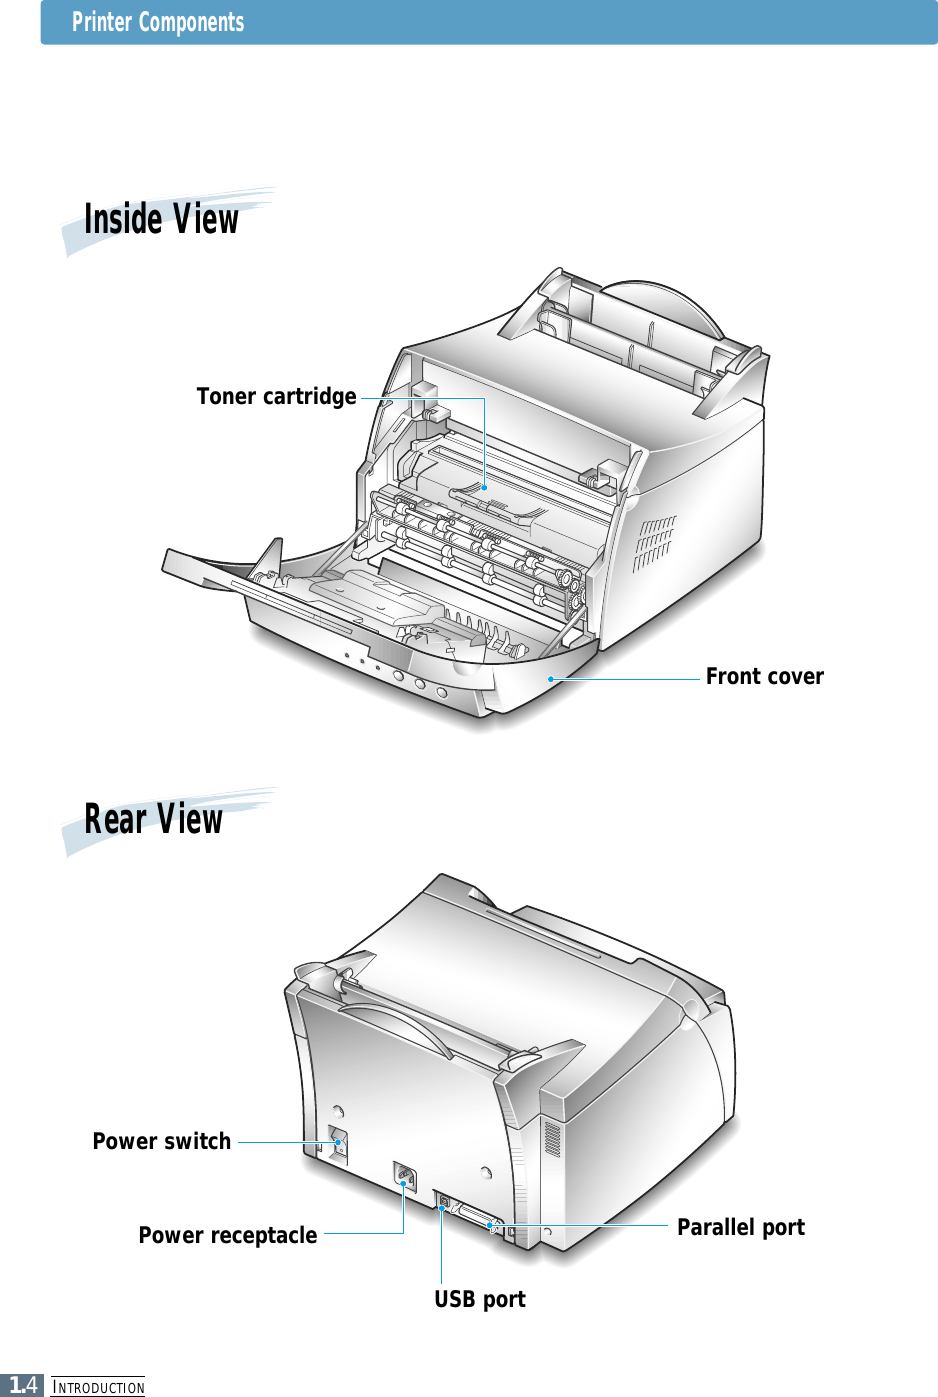 INTRODUCTION1.4Front coverInside ViewRear ViewPower switchPower receptacle Parallel portUSB portToner cartridgePrinter Components